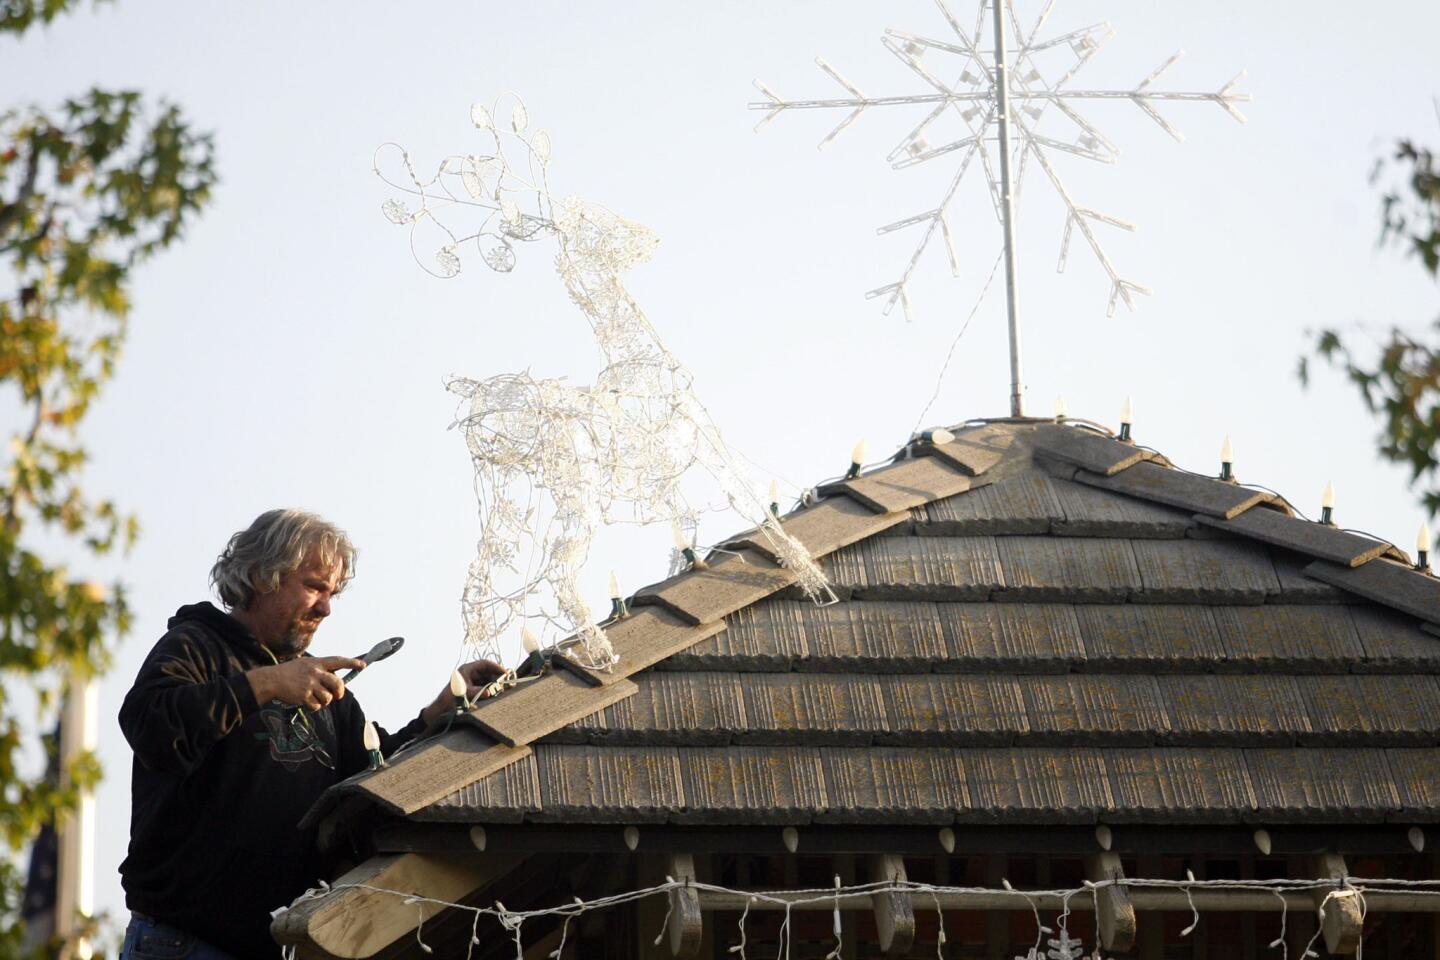 Kent Barr fixes the reindeer on top of the gazebo during Festival in Lights, which took place at the La Canada Flintridge Memorial Park on Friday, December 7, 2012.